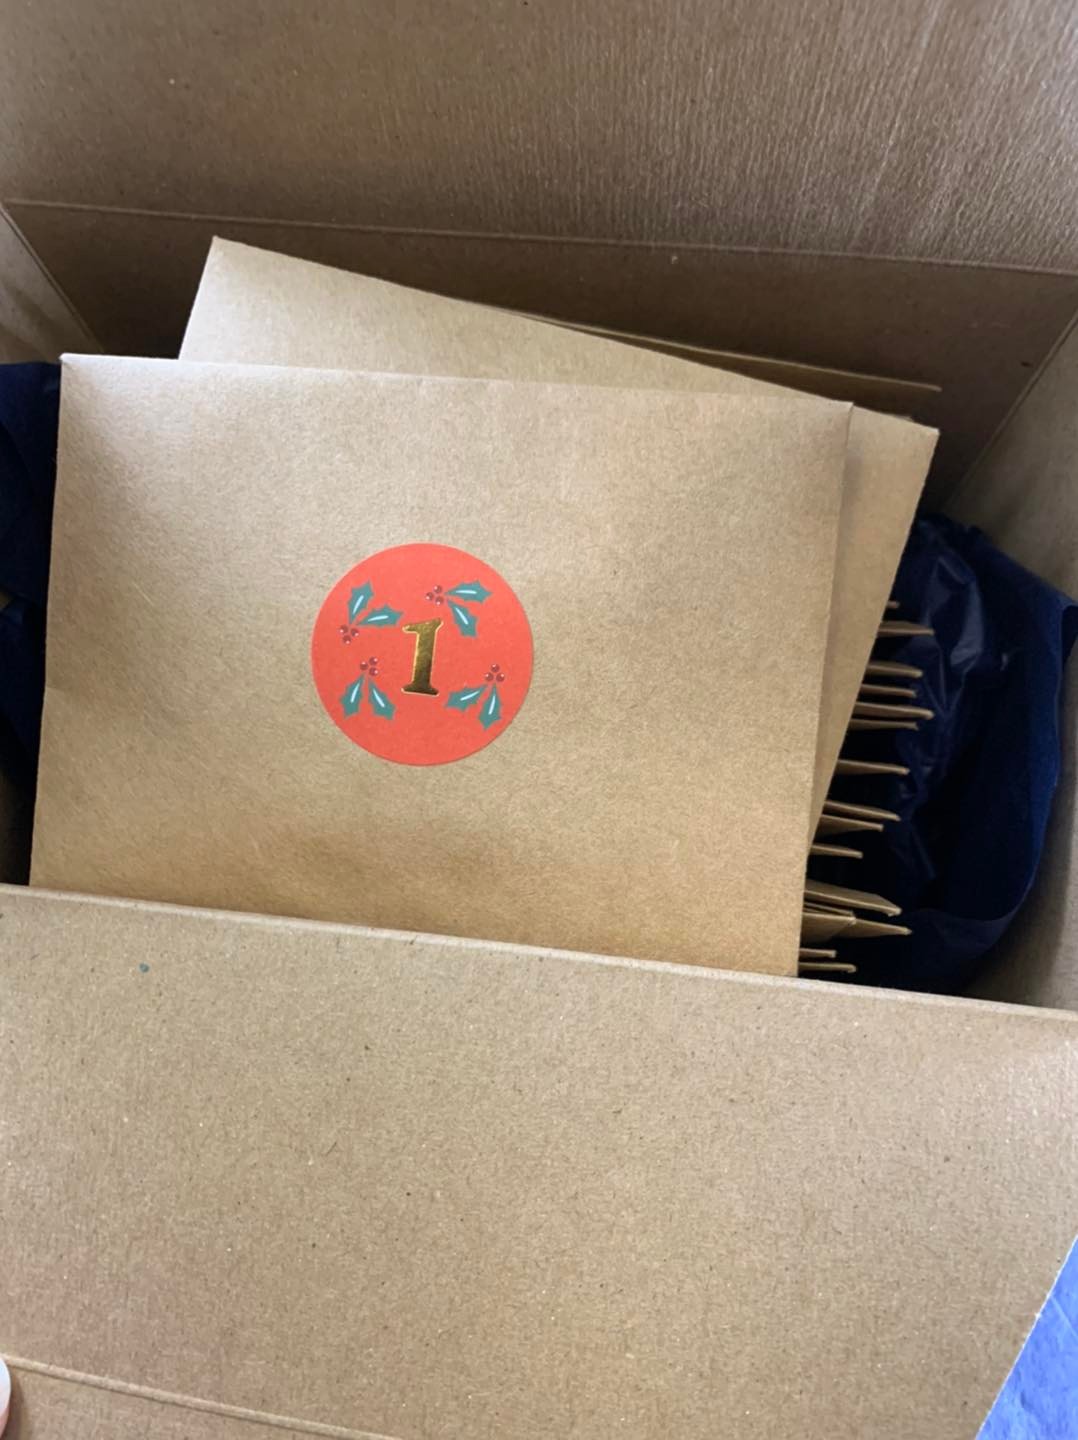 In a paper box, there are brown numbered envelopes with circle stickers with a number. The top envelope has a sticker with the number 1 on it. Photo from Walnut Street Tea Company's Facebook page.